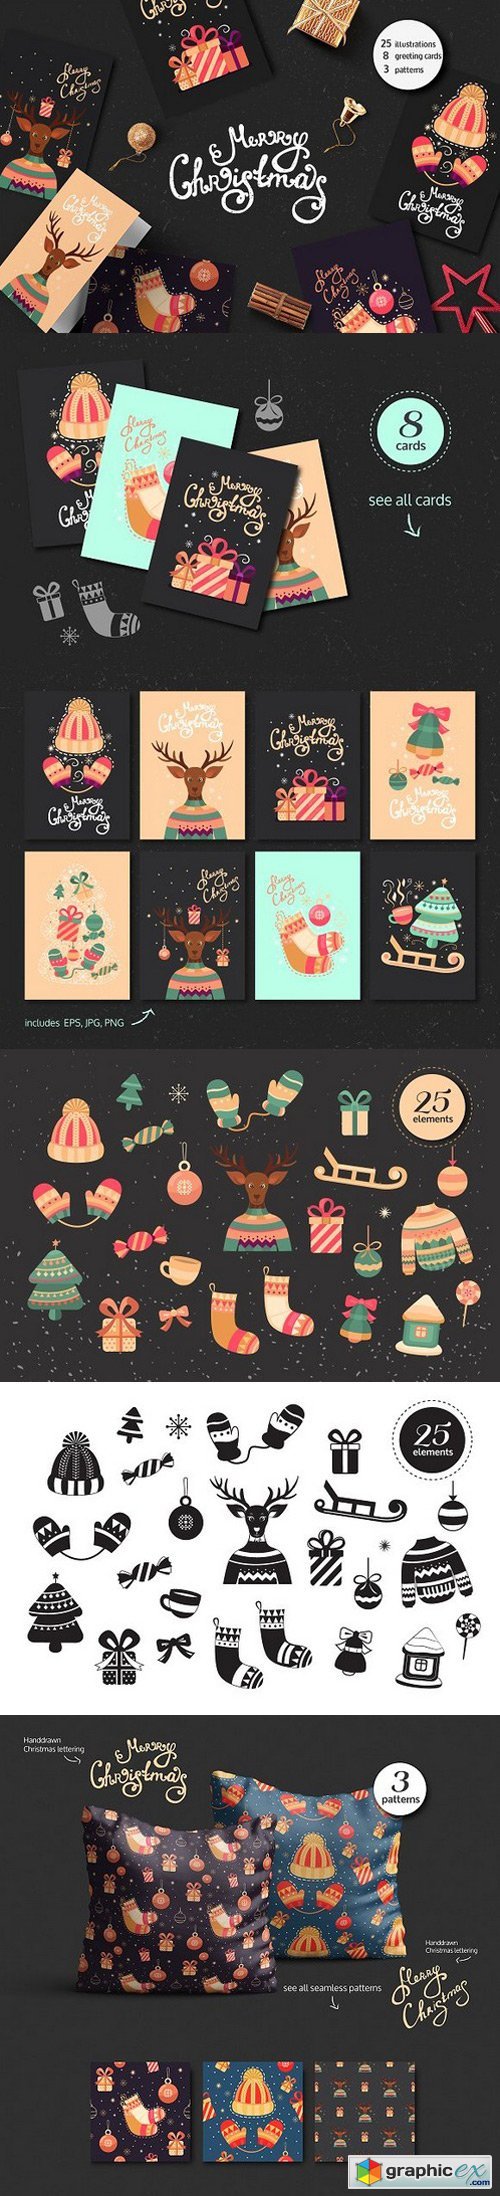 Christmas cards and illustrations